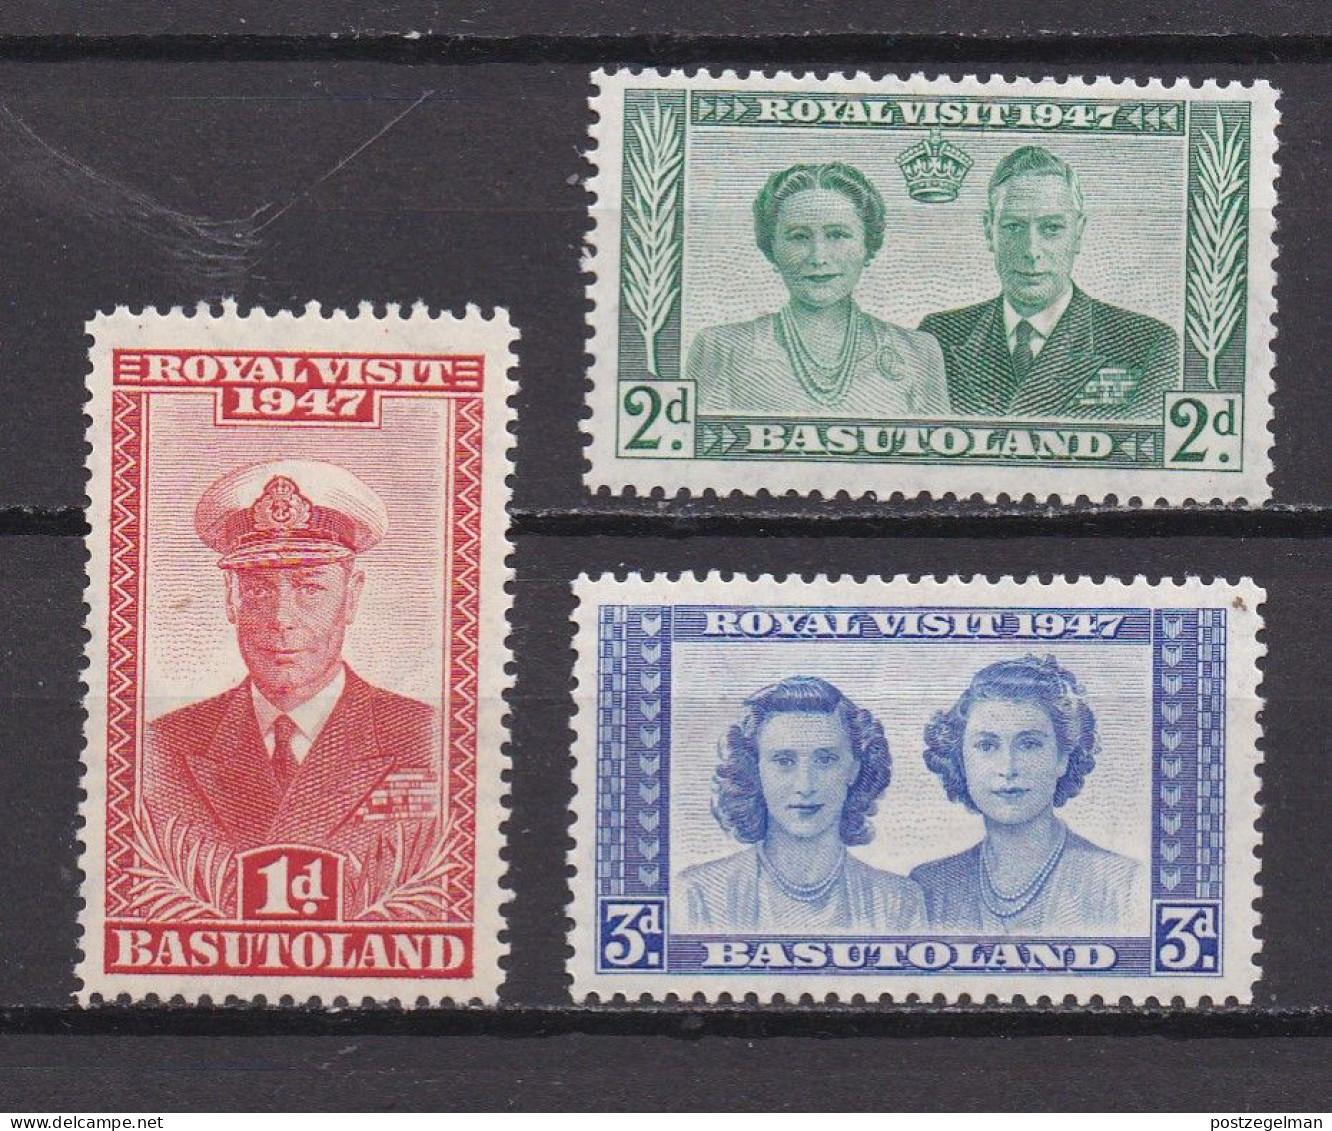 BASUTOLAND 1947 Mint Hinged Stamp(s) Royal Visit 35=38 (3 Values Only, ( Not A Complete Serie) - 1933-1964 Crown Colony